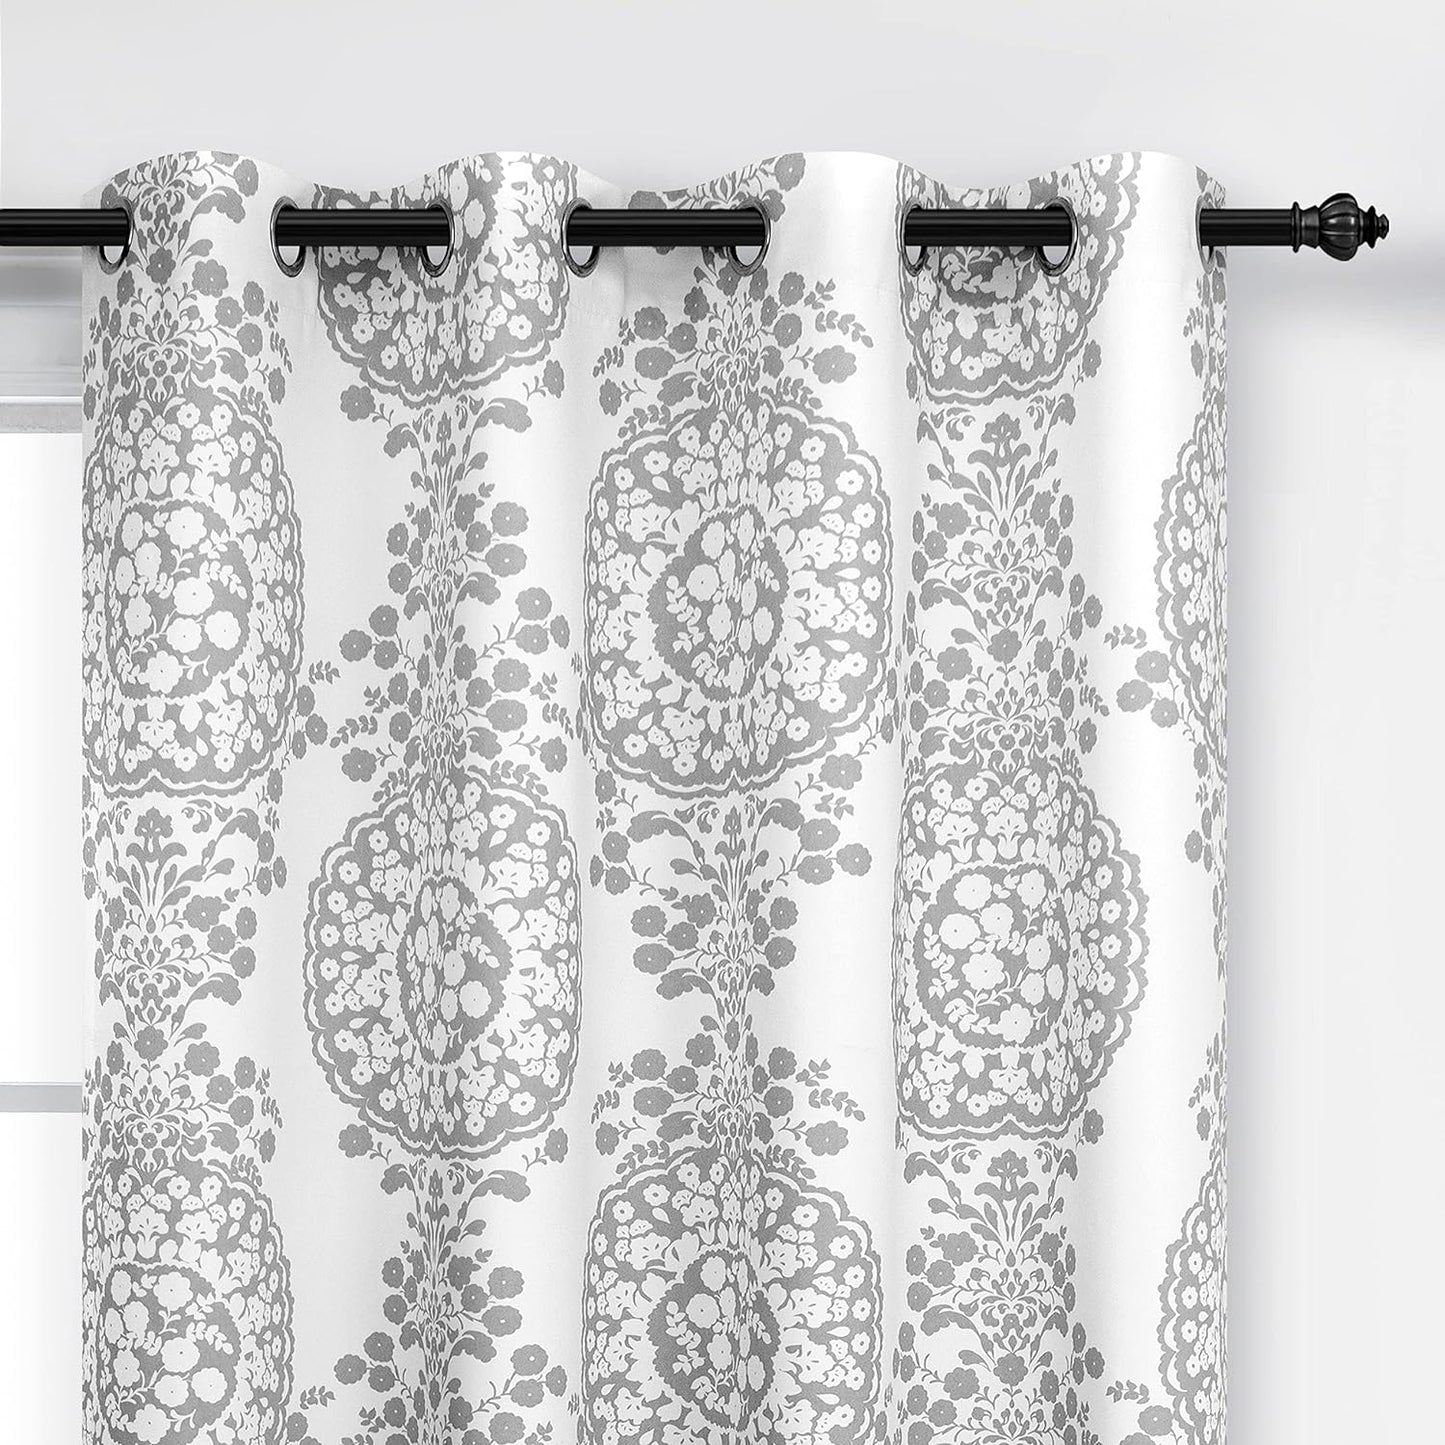 Driftaway Damask Curtains for Kitchen Bathroom Laundry Room Small Windows Floral Damask Medallion Patterned Adjustable Tie up Curtain Single 45 Inch by 63 Inch Dusty Blue  DriftAway Grey 50"X84"︱1 Panel 